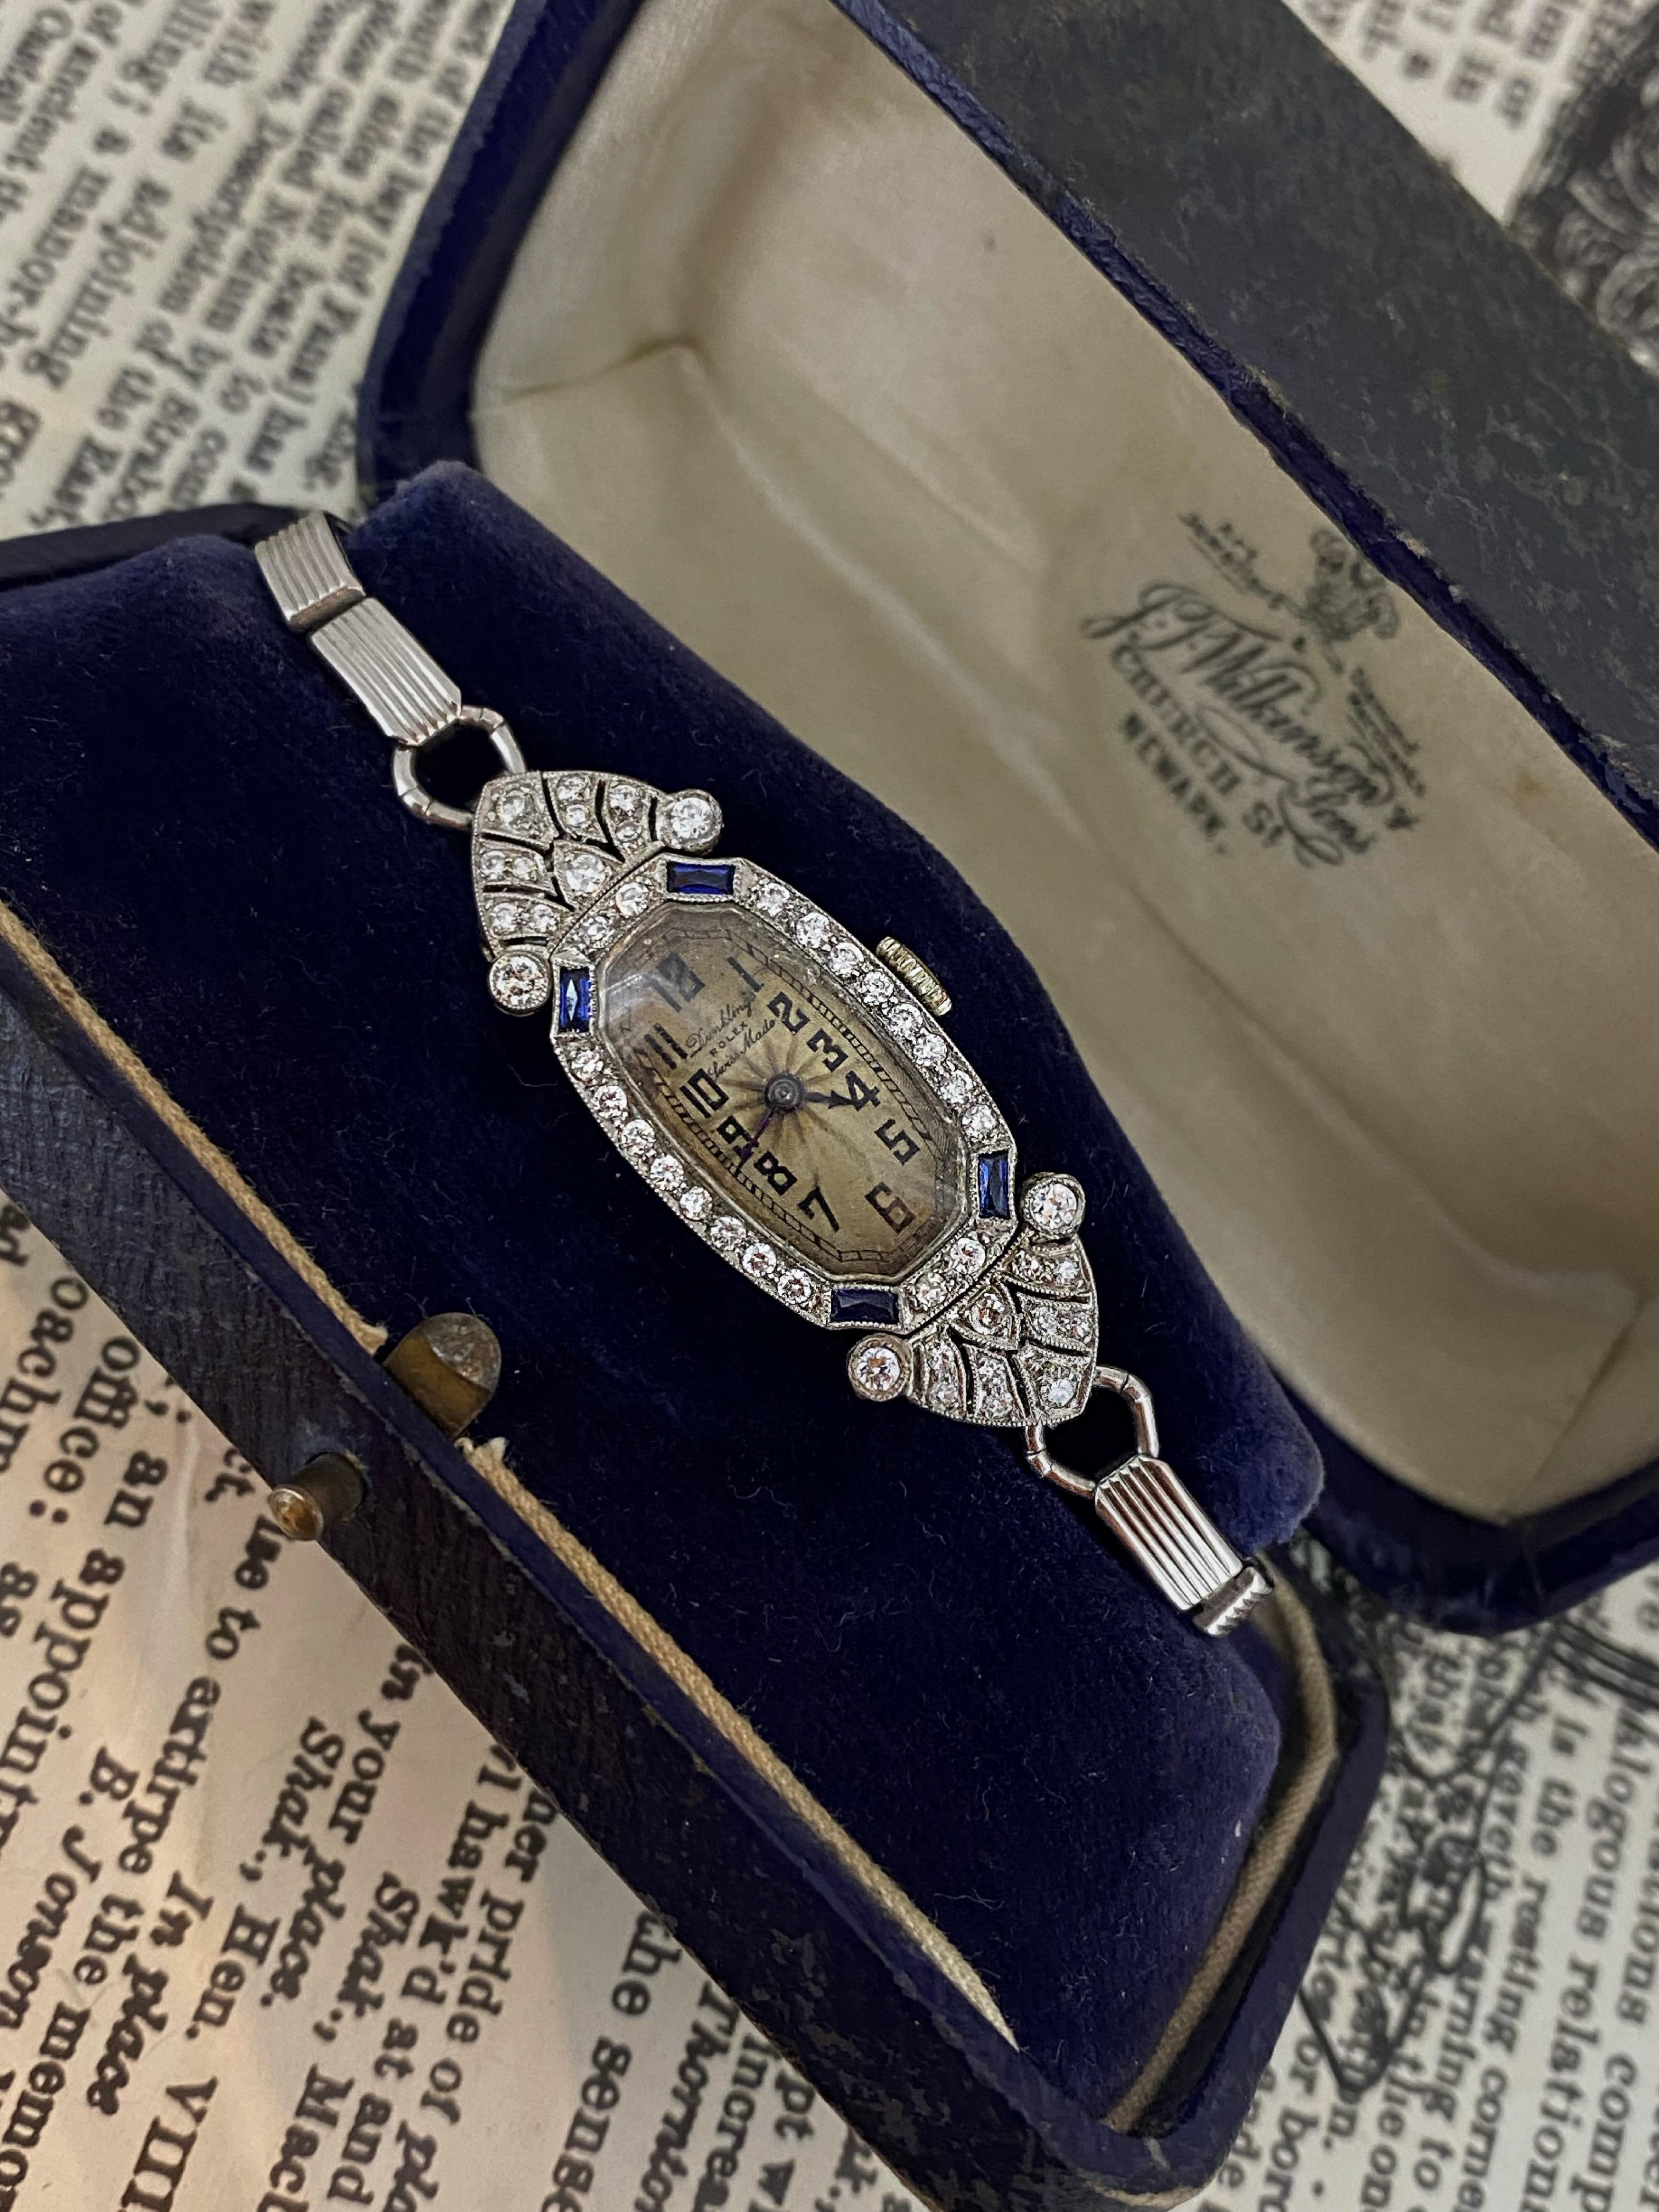 The unusually shaped hinged Case is the pivotal feature of
this exquisite & extremely rare Art-Deco ladies Rolex cocktail watch

Despite its age, 
the timepiece is in excellent condition & in great working order 

~

Case performed in 18K White